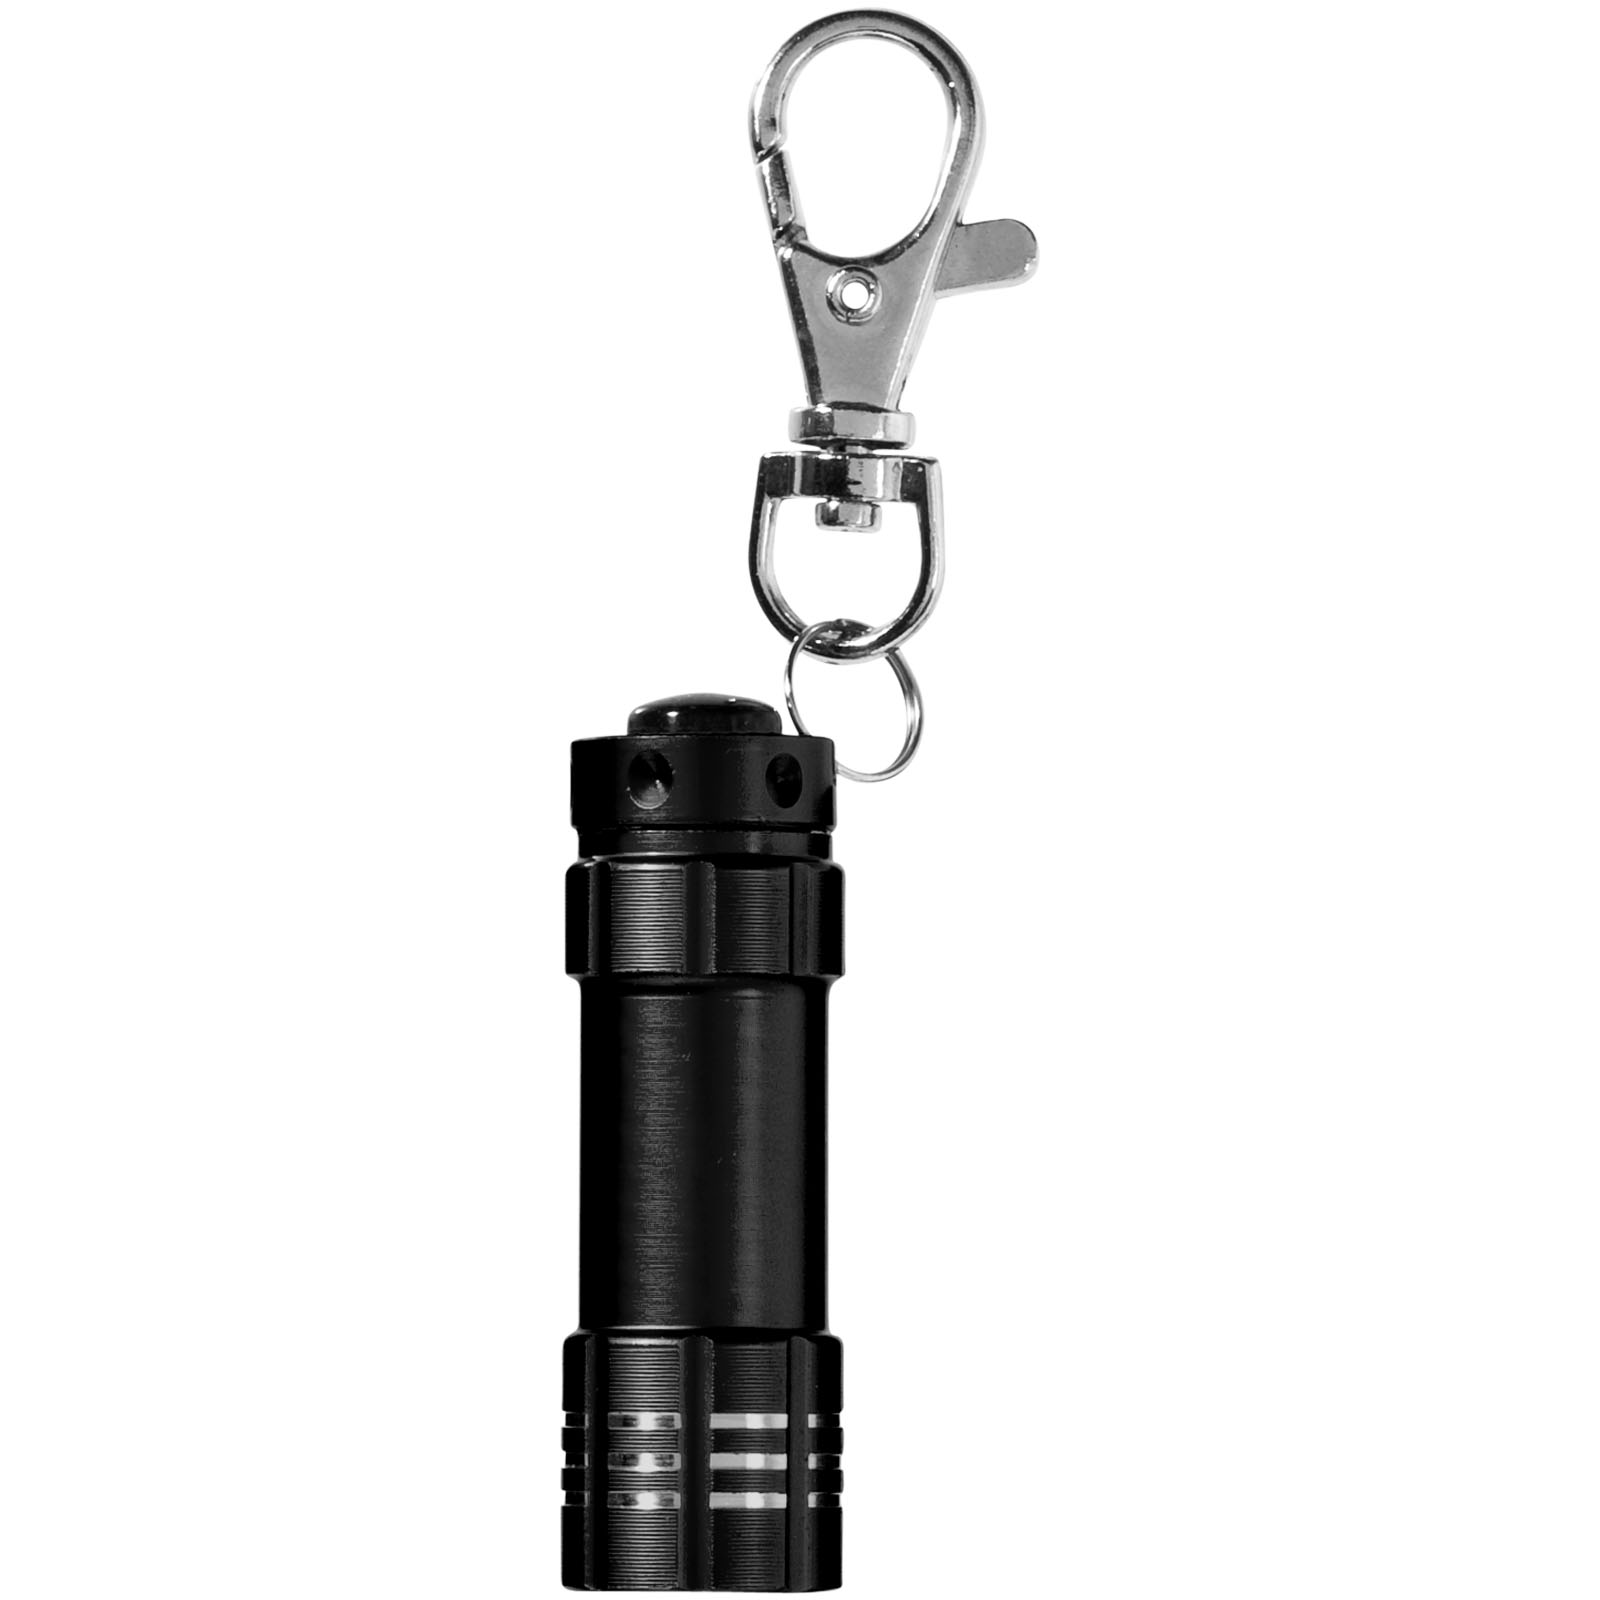 Advertising Lamps - Astro LED keychain light - 1